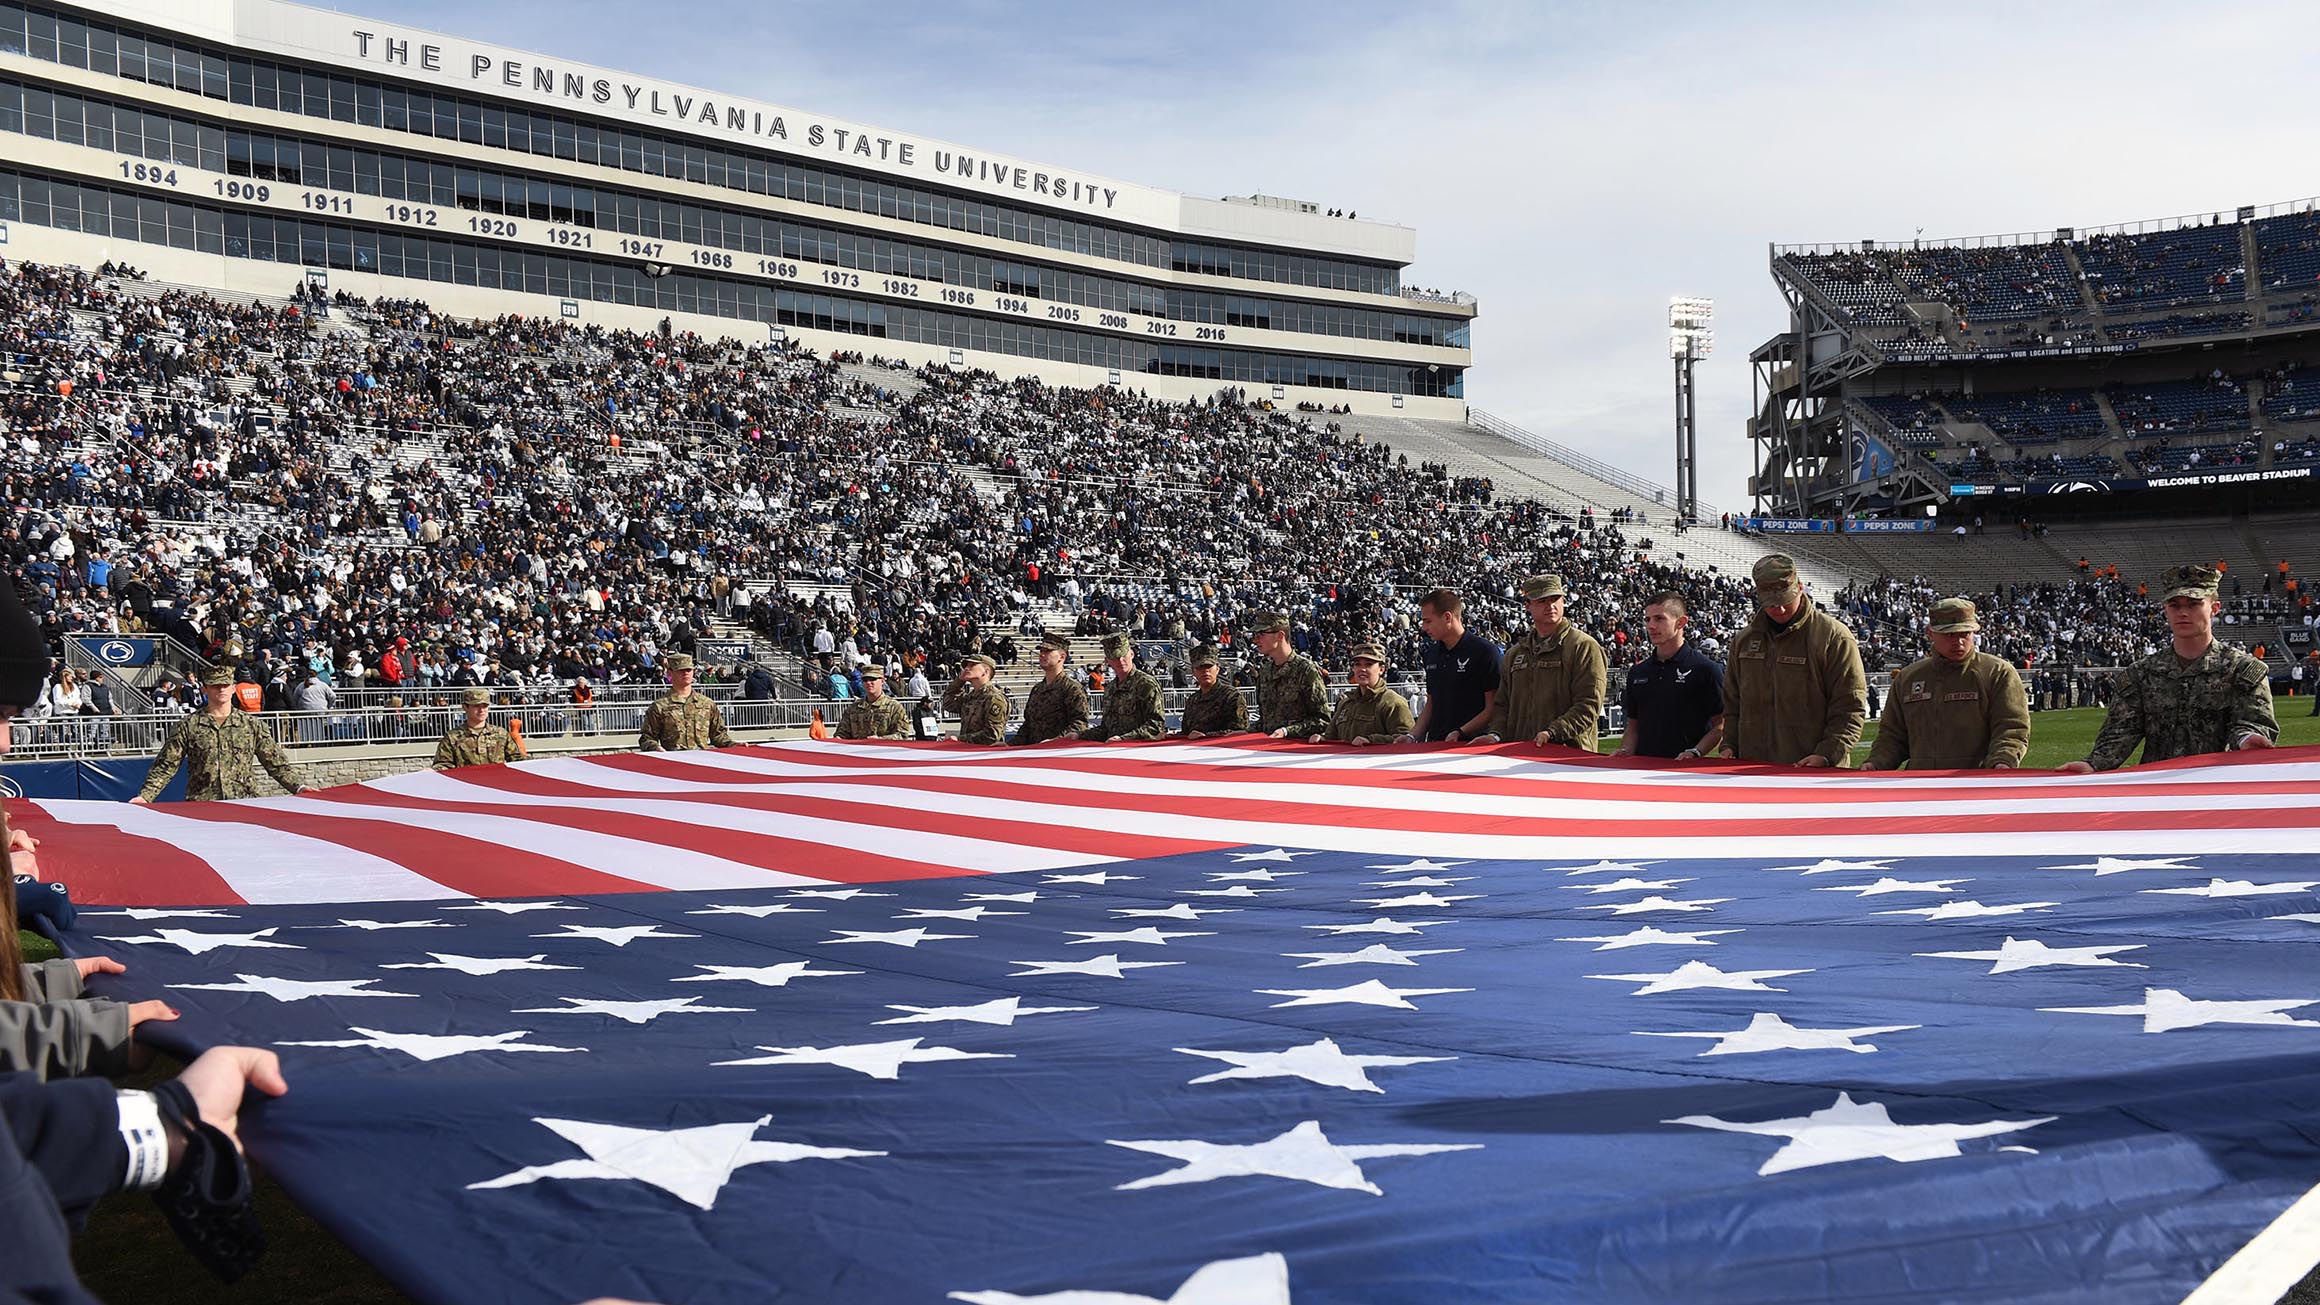 An American flag is displayed on the field at Beaver Stadium by military service members.